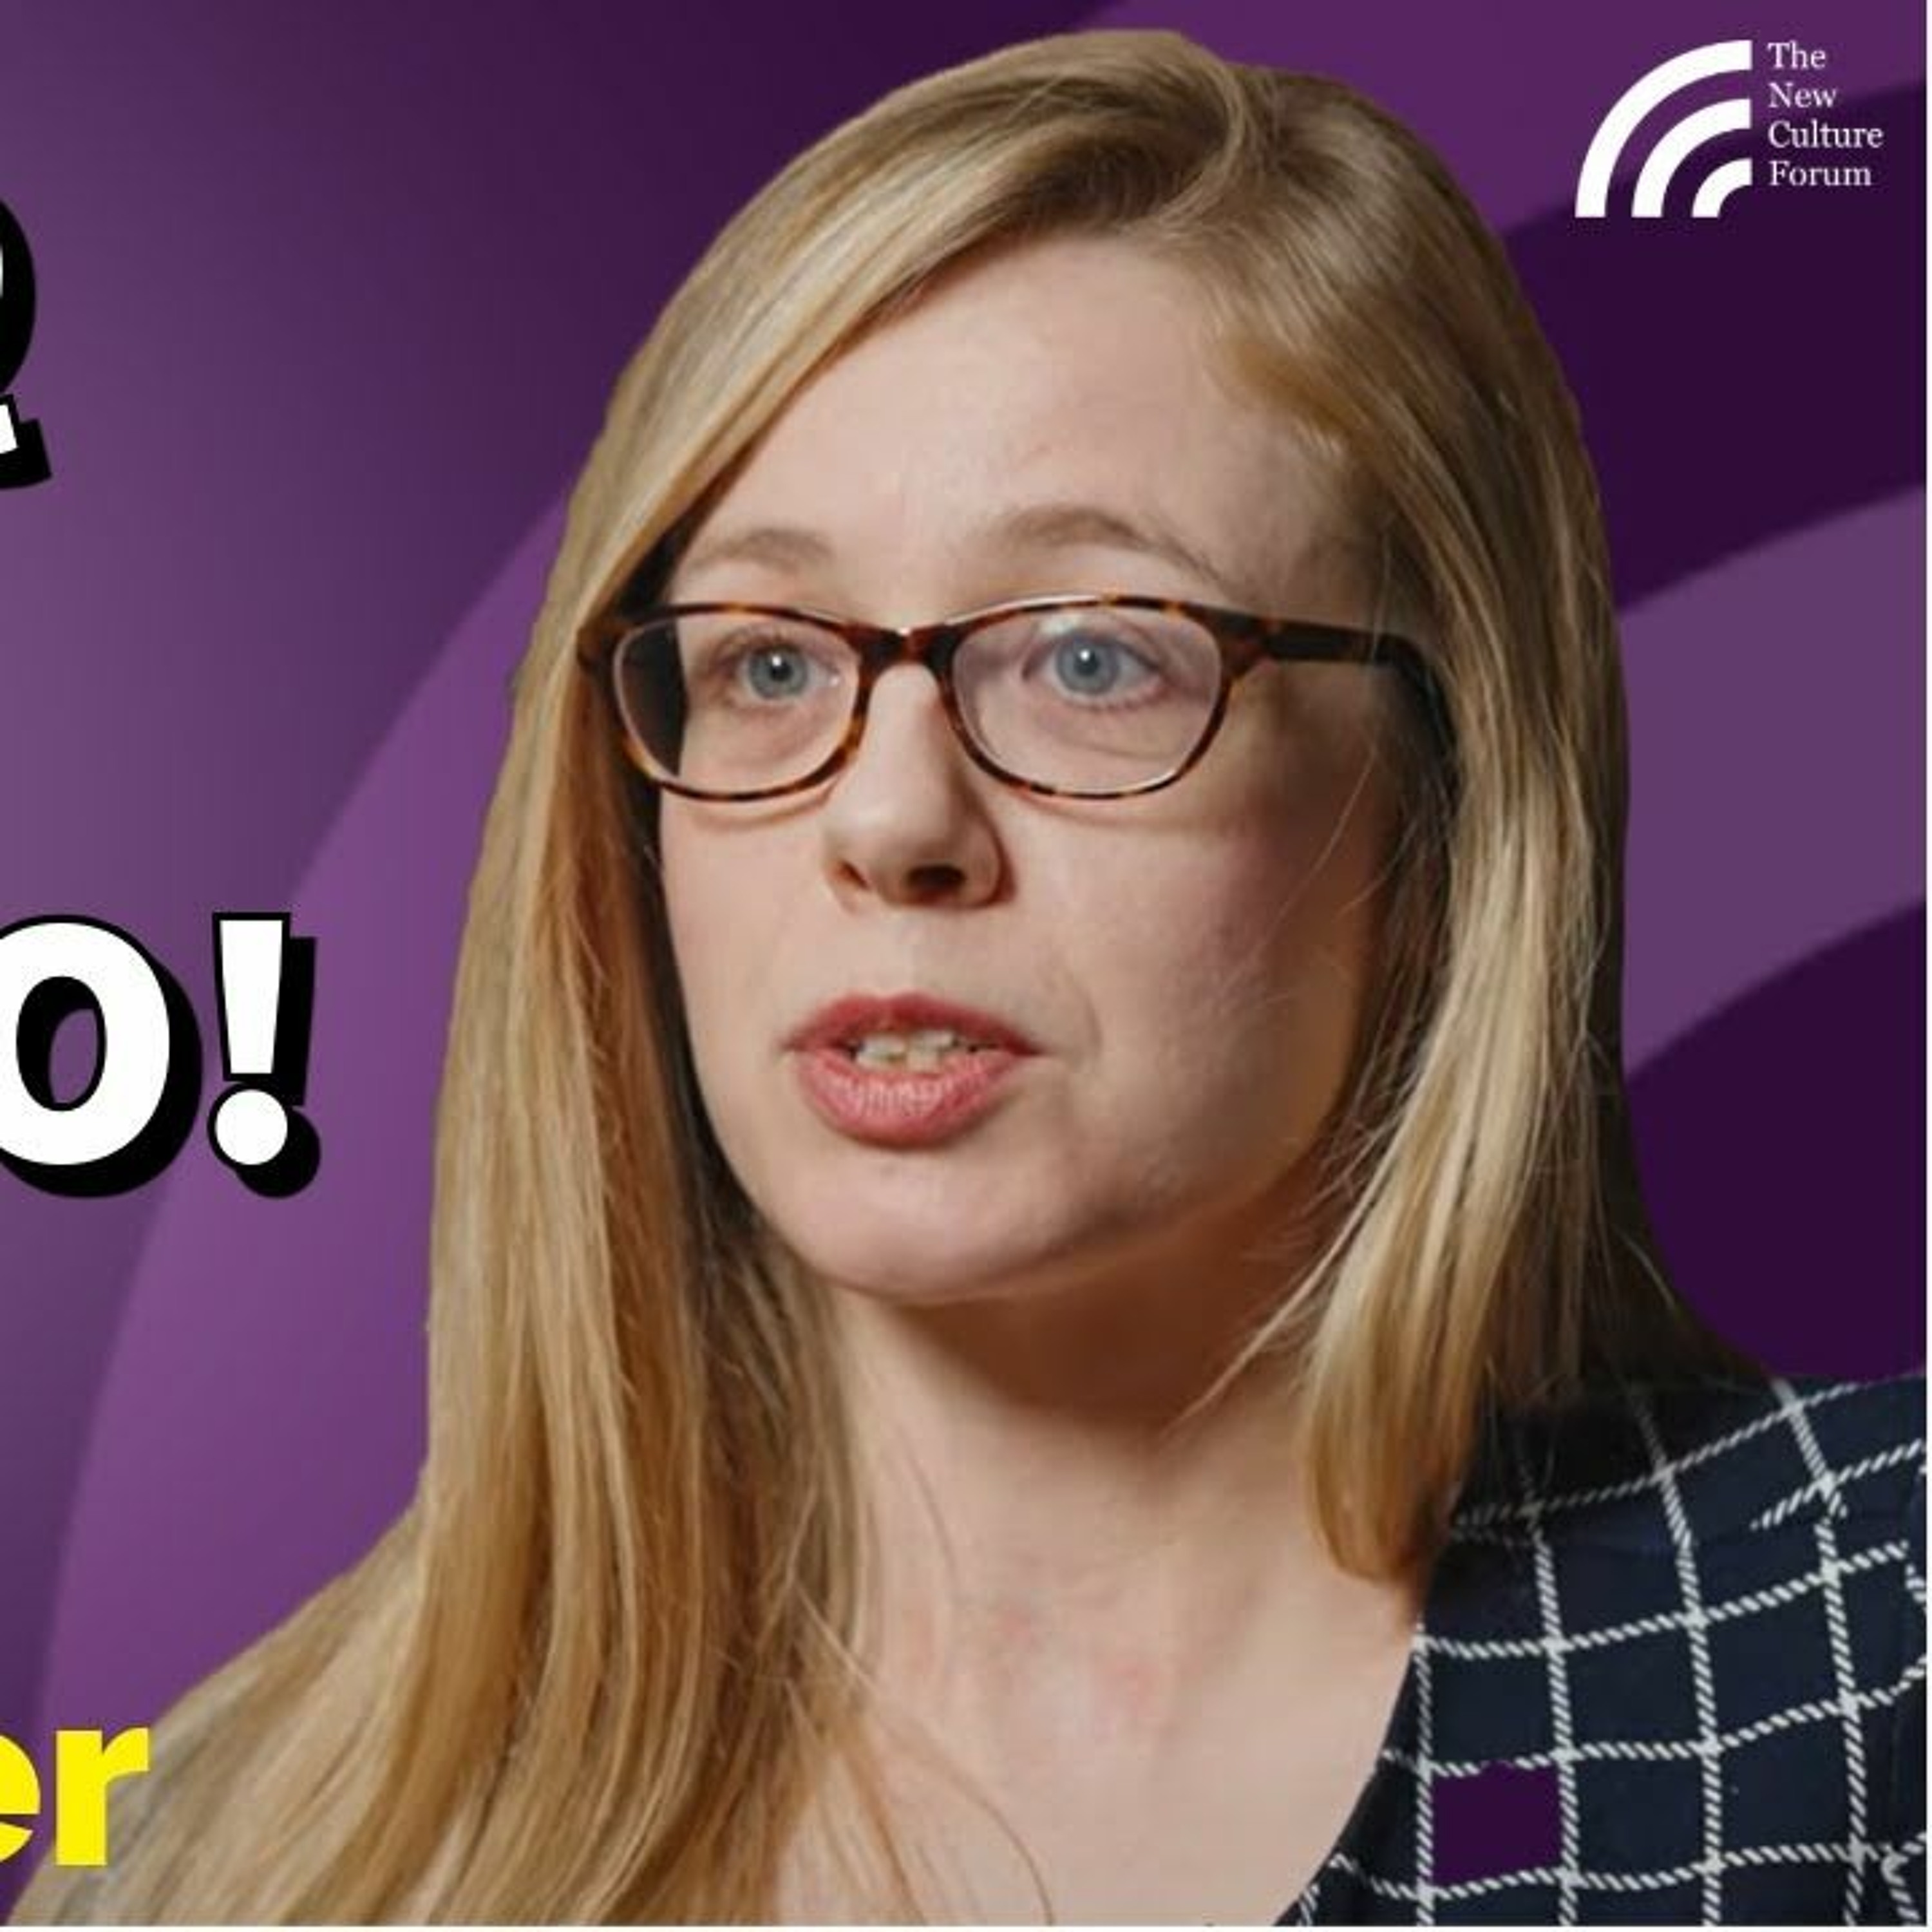 Why I’m Standing to become Mayor of London. SDP candidate Amy Gallagher: ”I Grieve for London”.